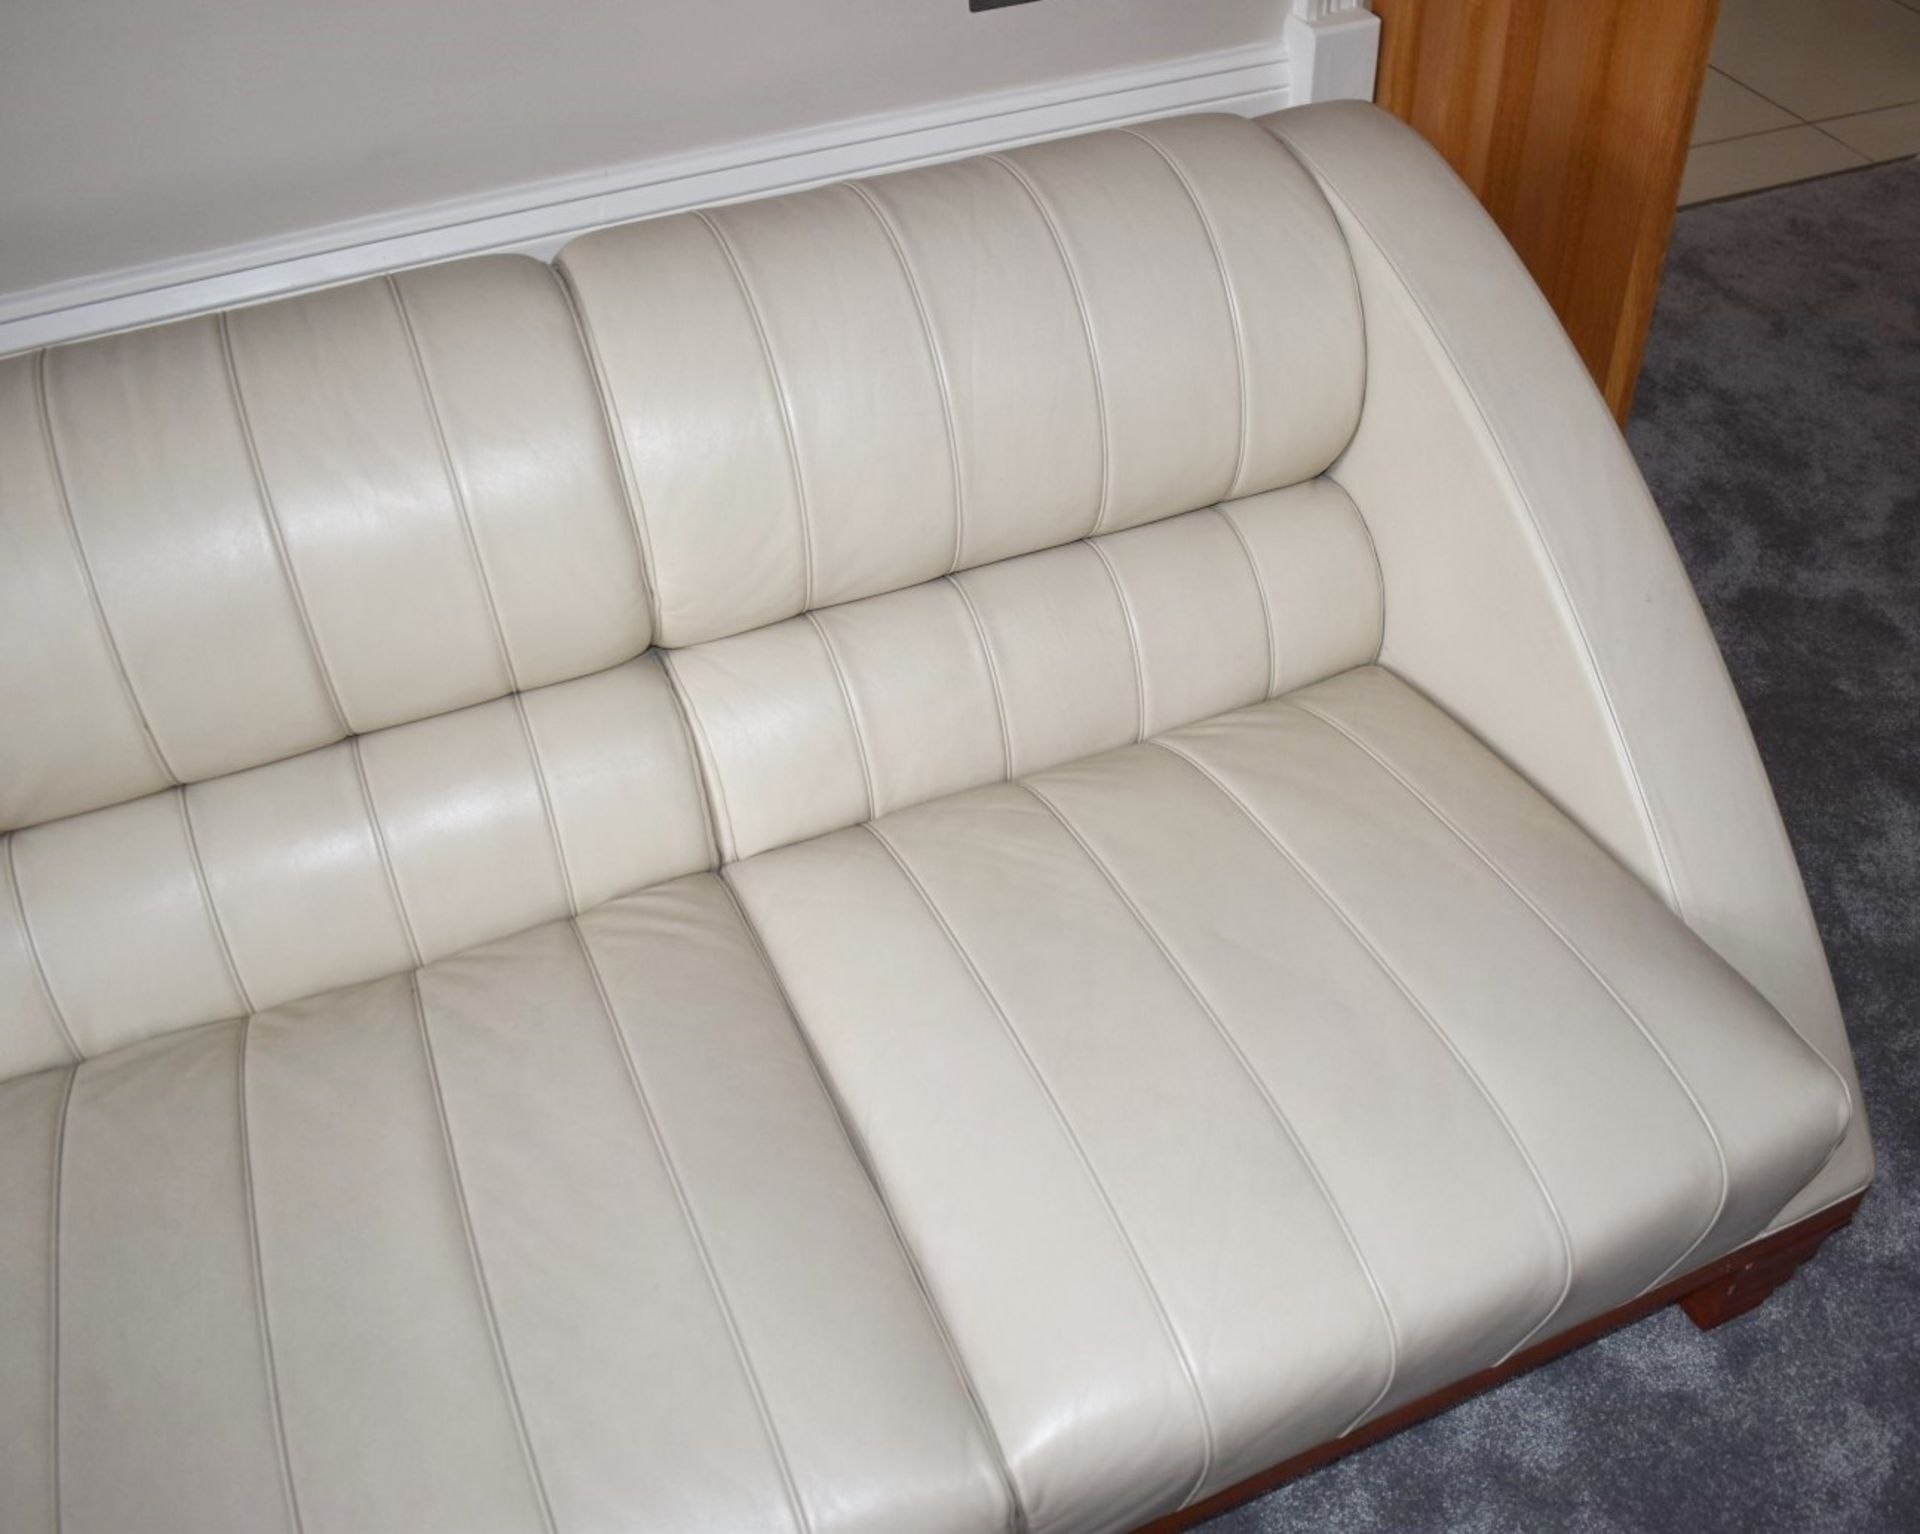 1 x Giorgetti Aries Three Seater Leather Sofa - Designed by Leon Krier - Contemporary Sofa - Image 3 of 10